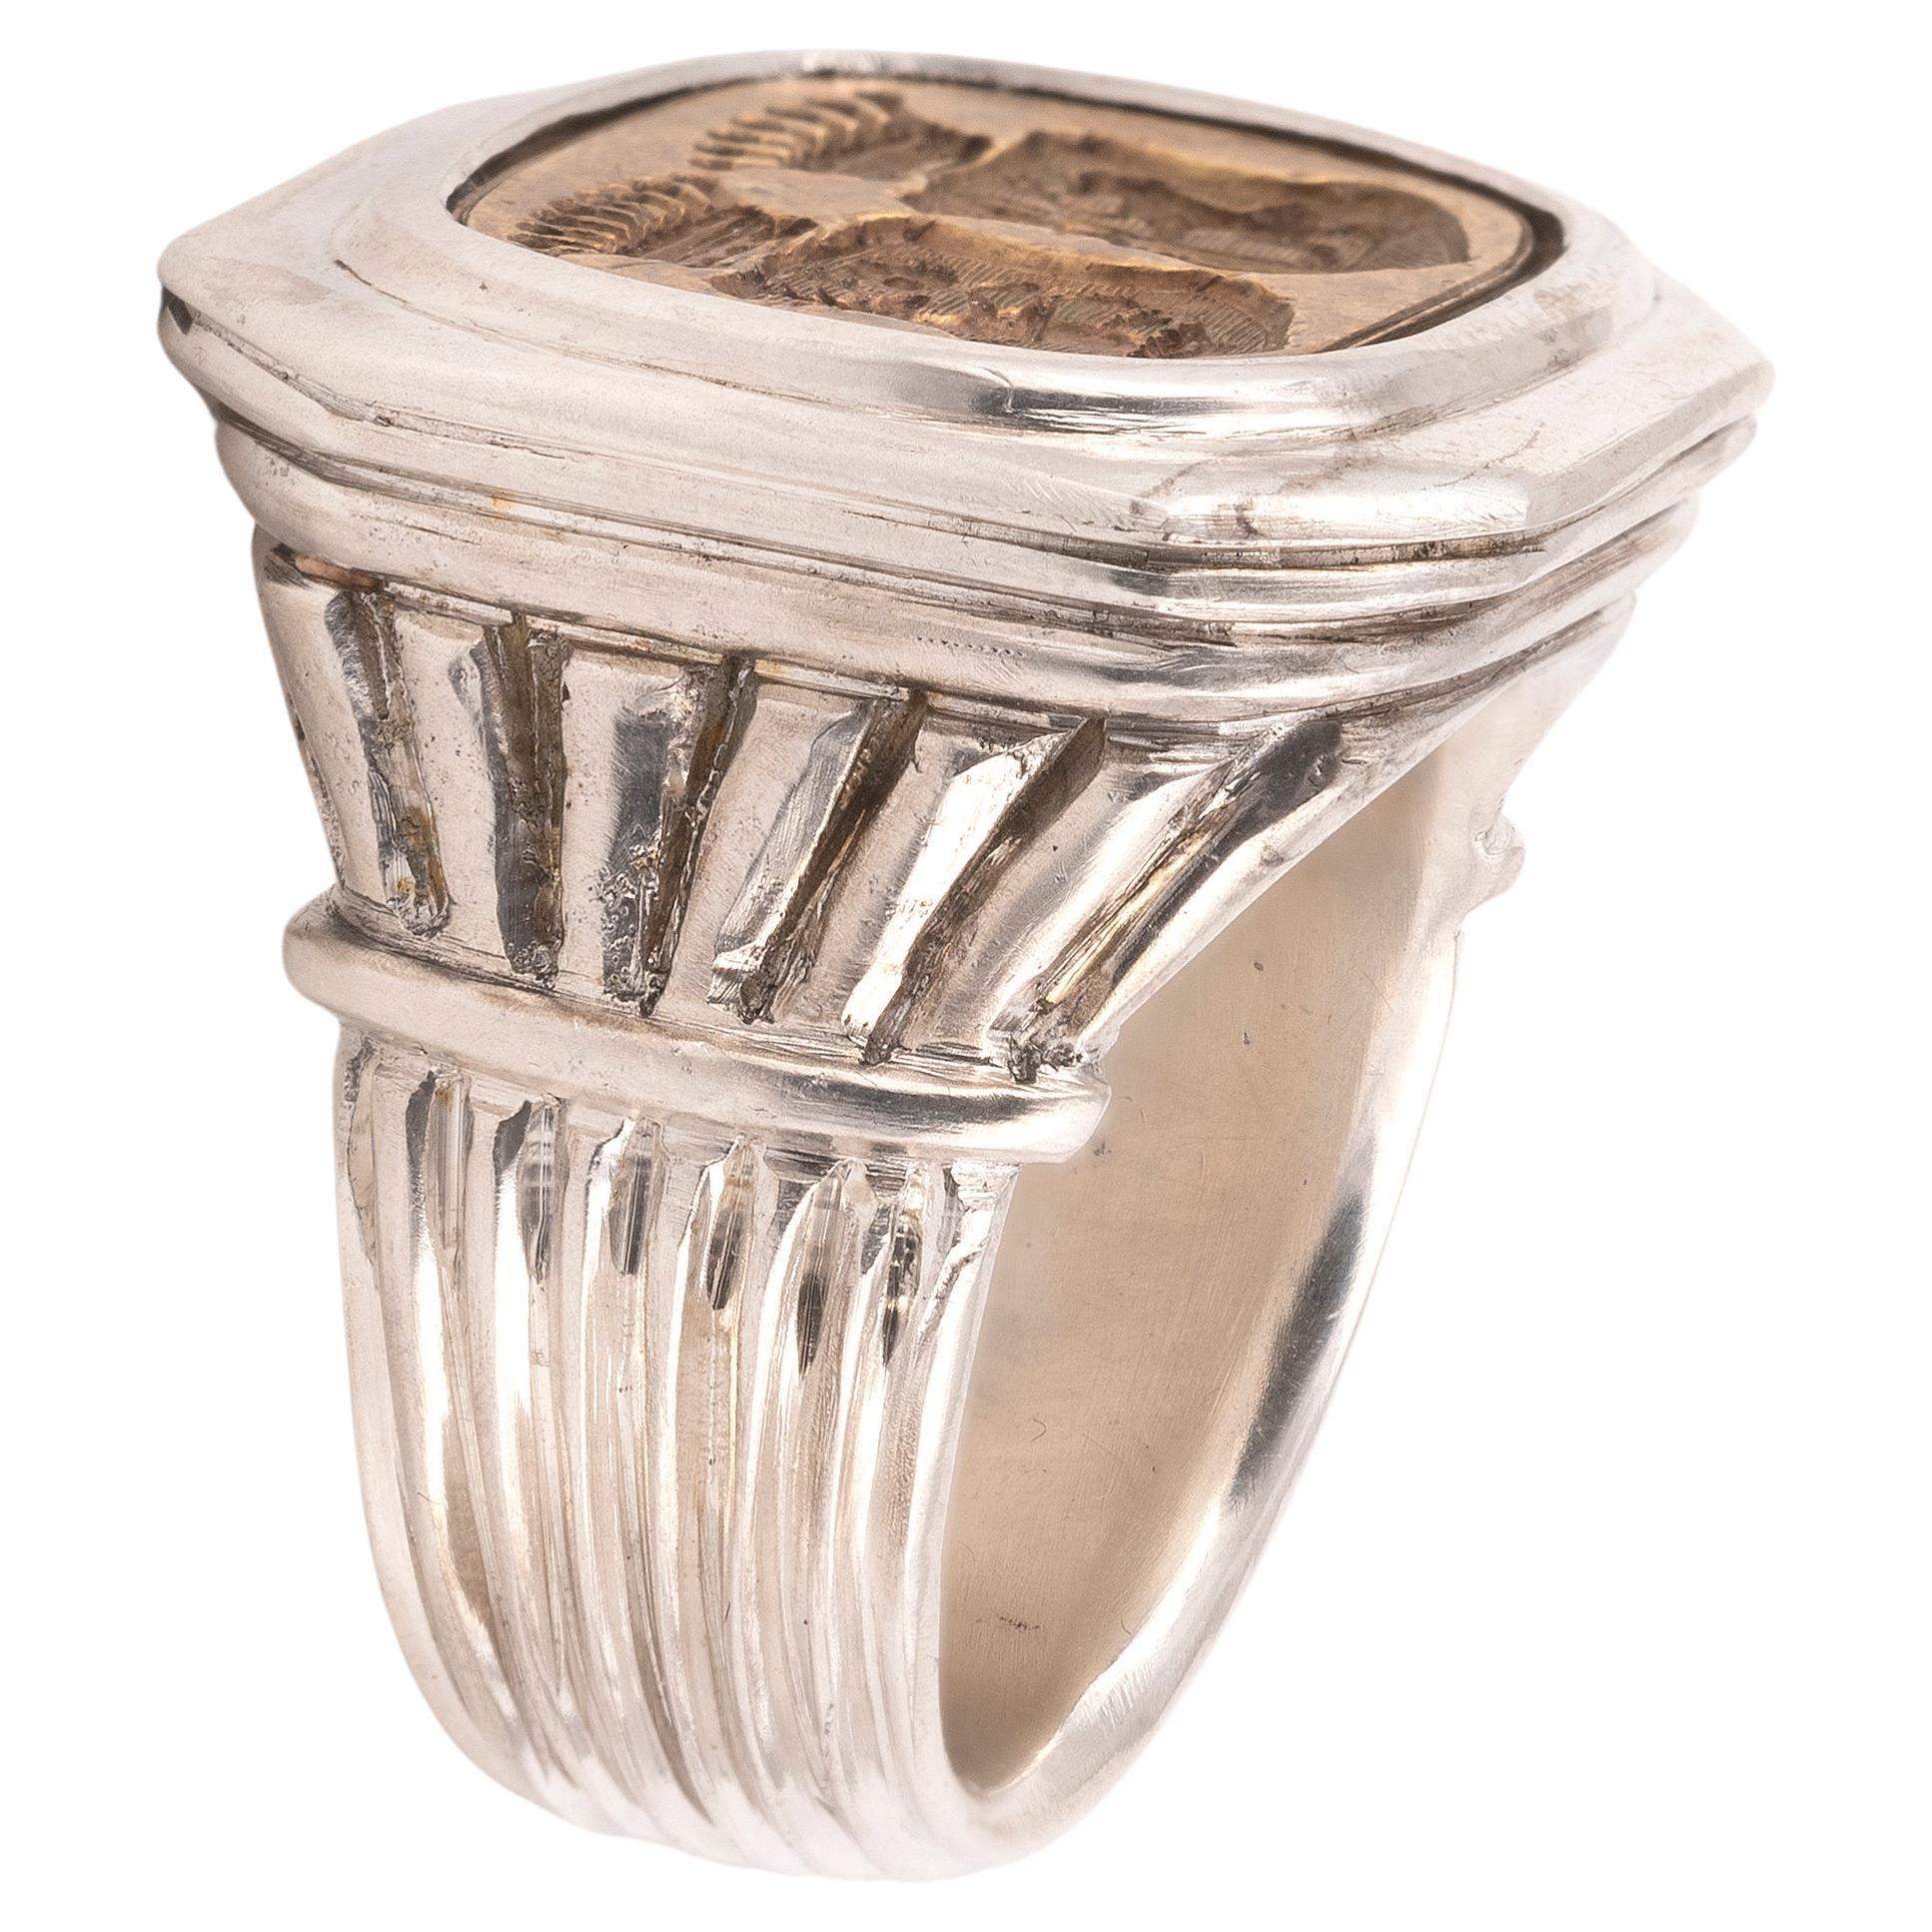 Silver and bronze octagonal shape with family crest ring.
Top size 24mm x 25mm
Size: 9 3/4
Weight: 41.57gr.